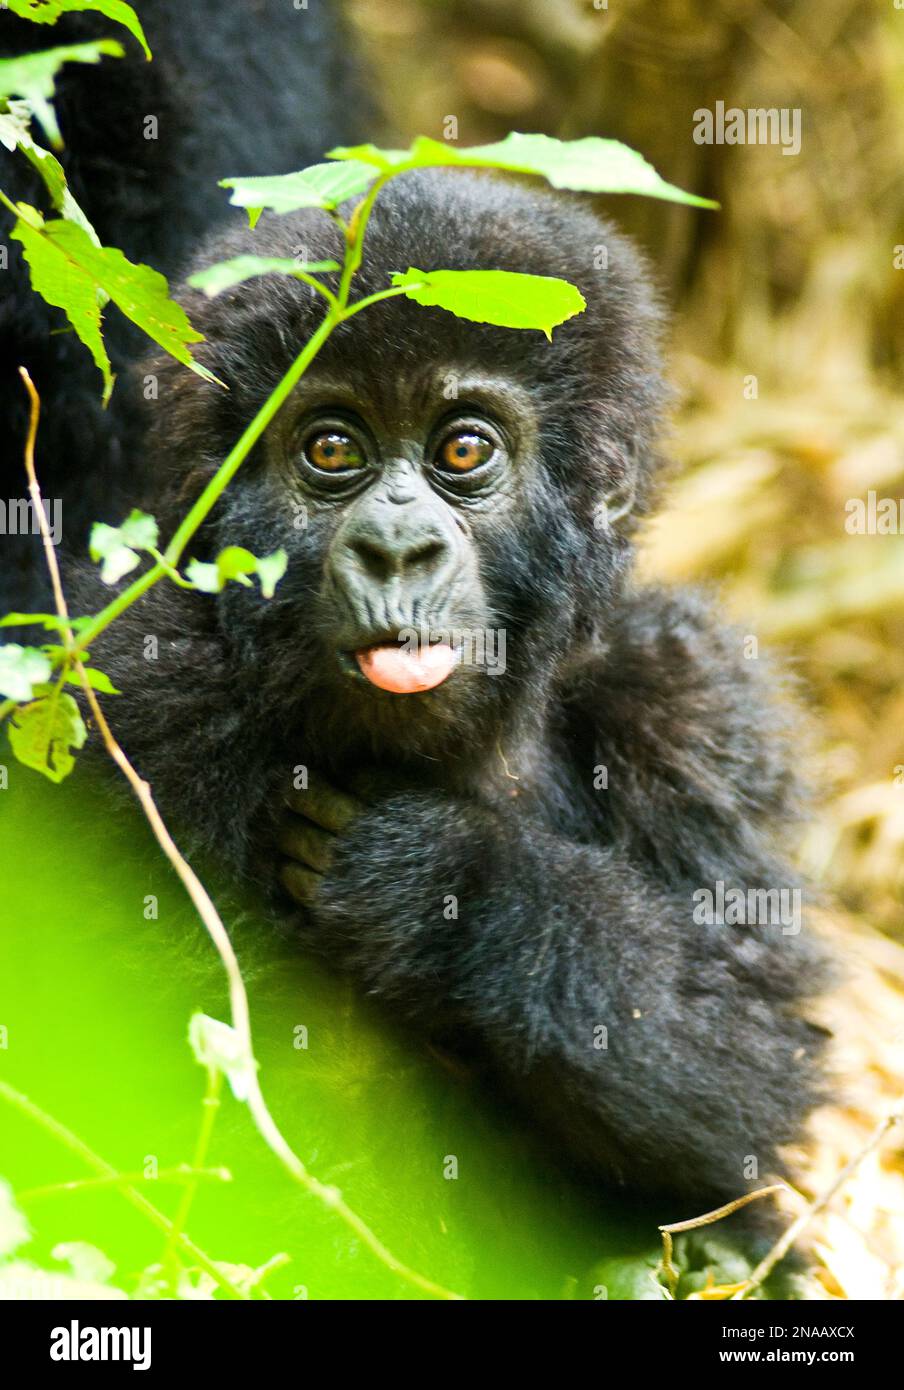 Portrait of an infant eastern gorilla (Gorilla beringei) looking out at the camera trough the leaves in the jungle with its tongue sticking out Stock Photo